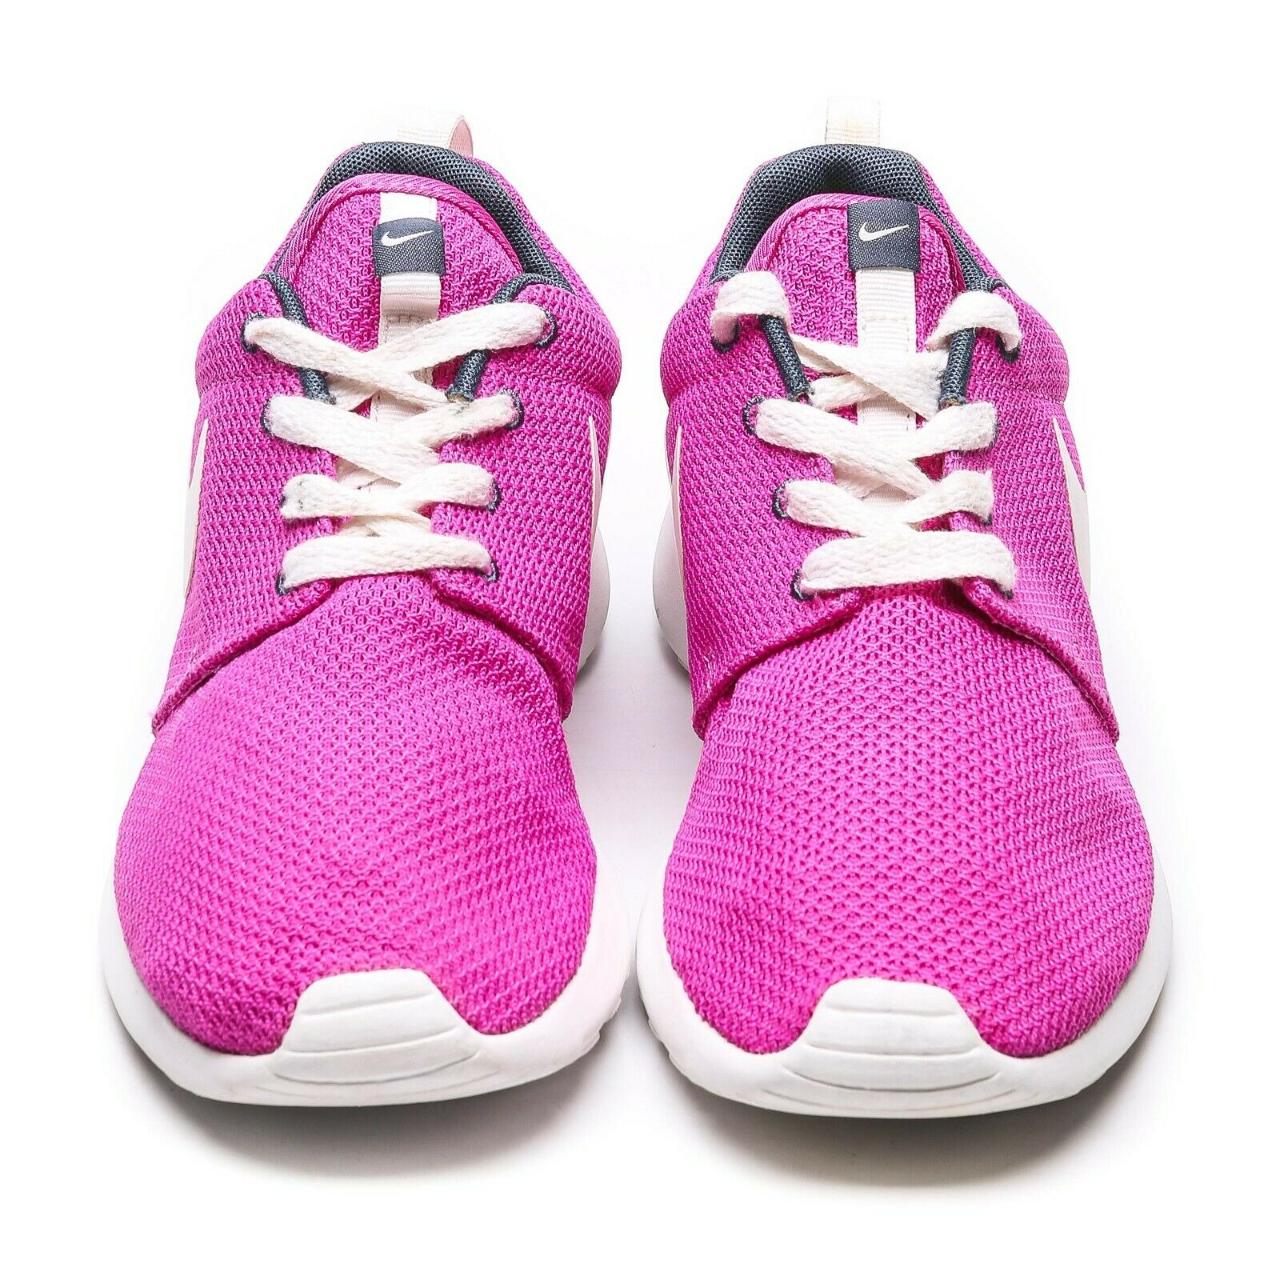 Nike Women's Pink and White Trainers (2)